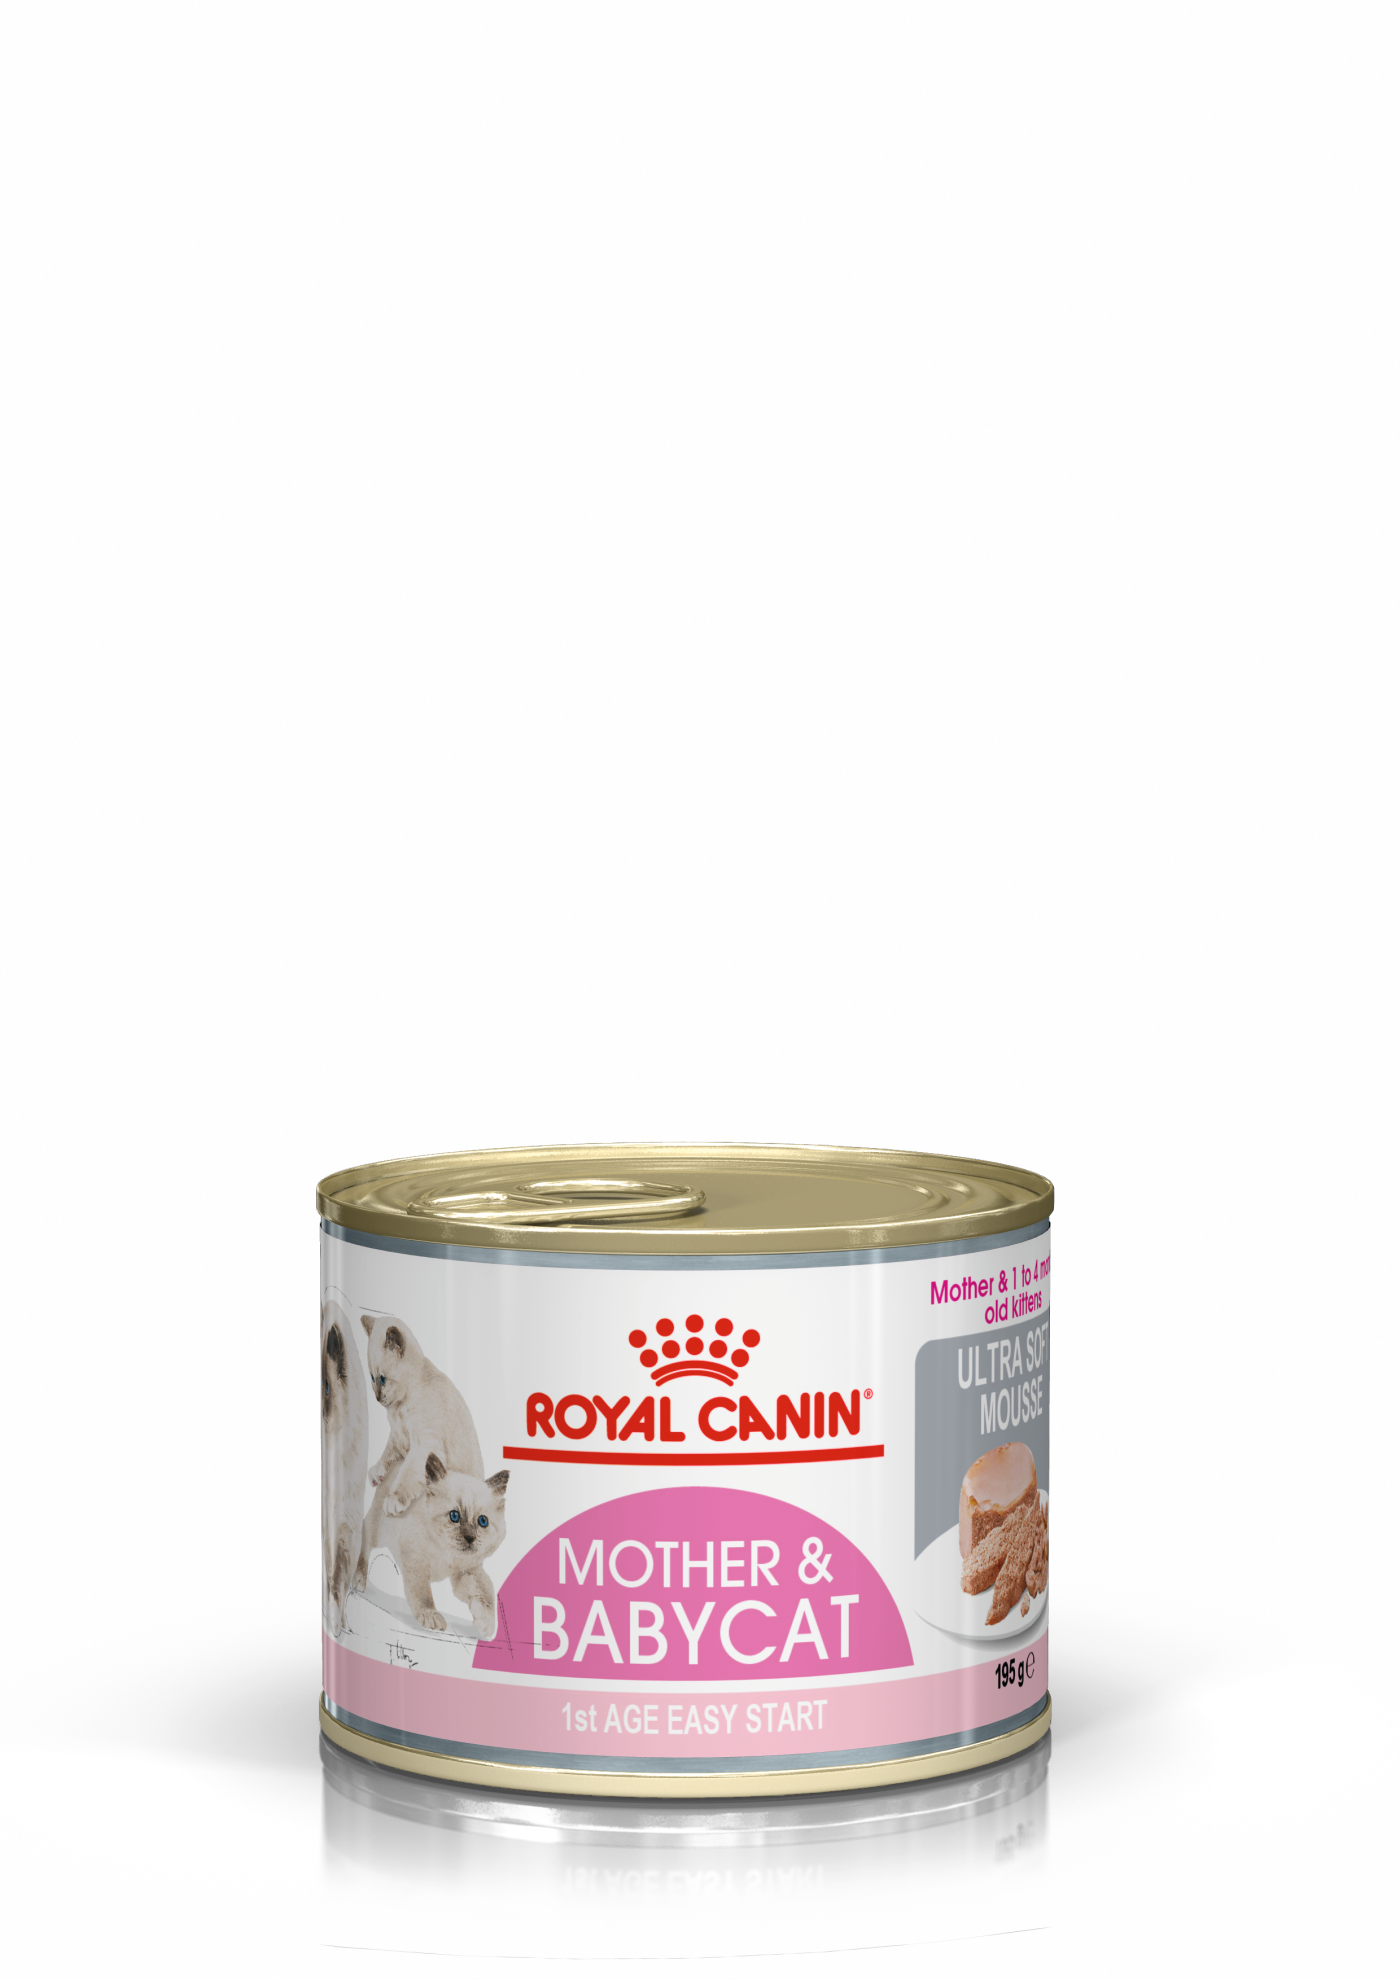 royal canin mother and baby cat 10kg